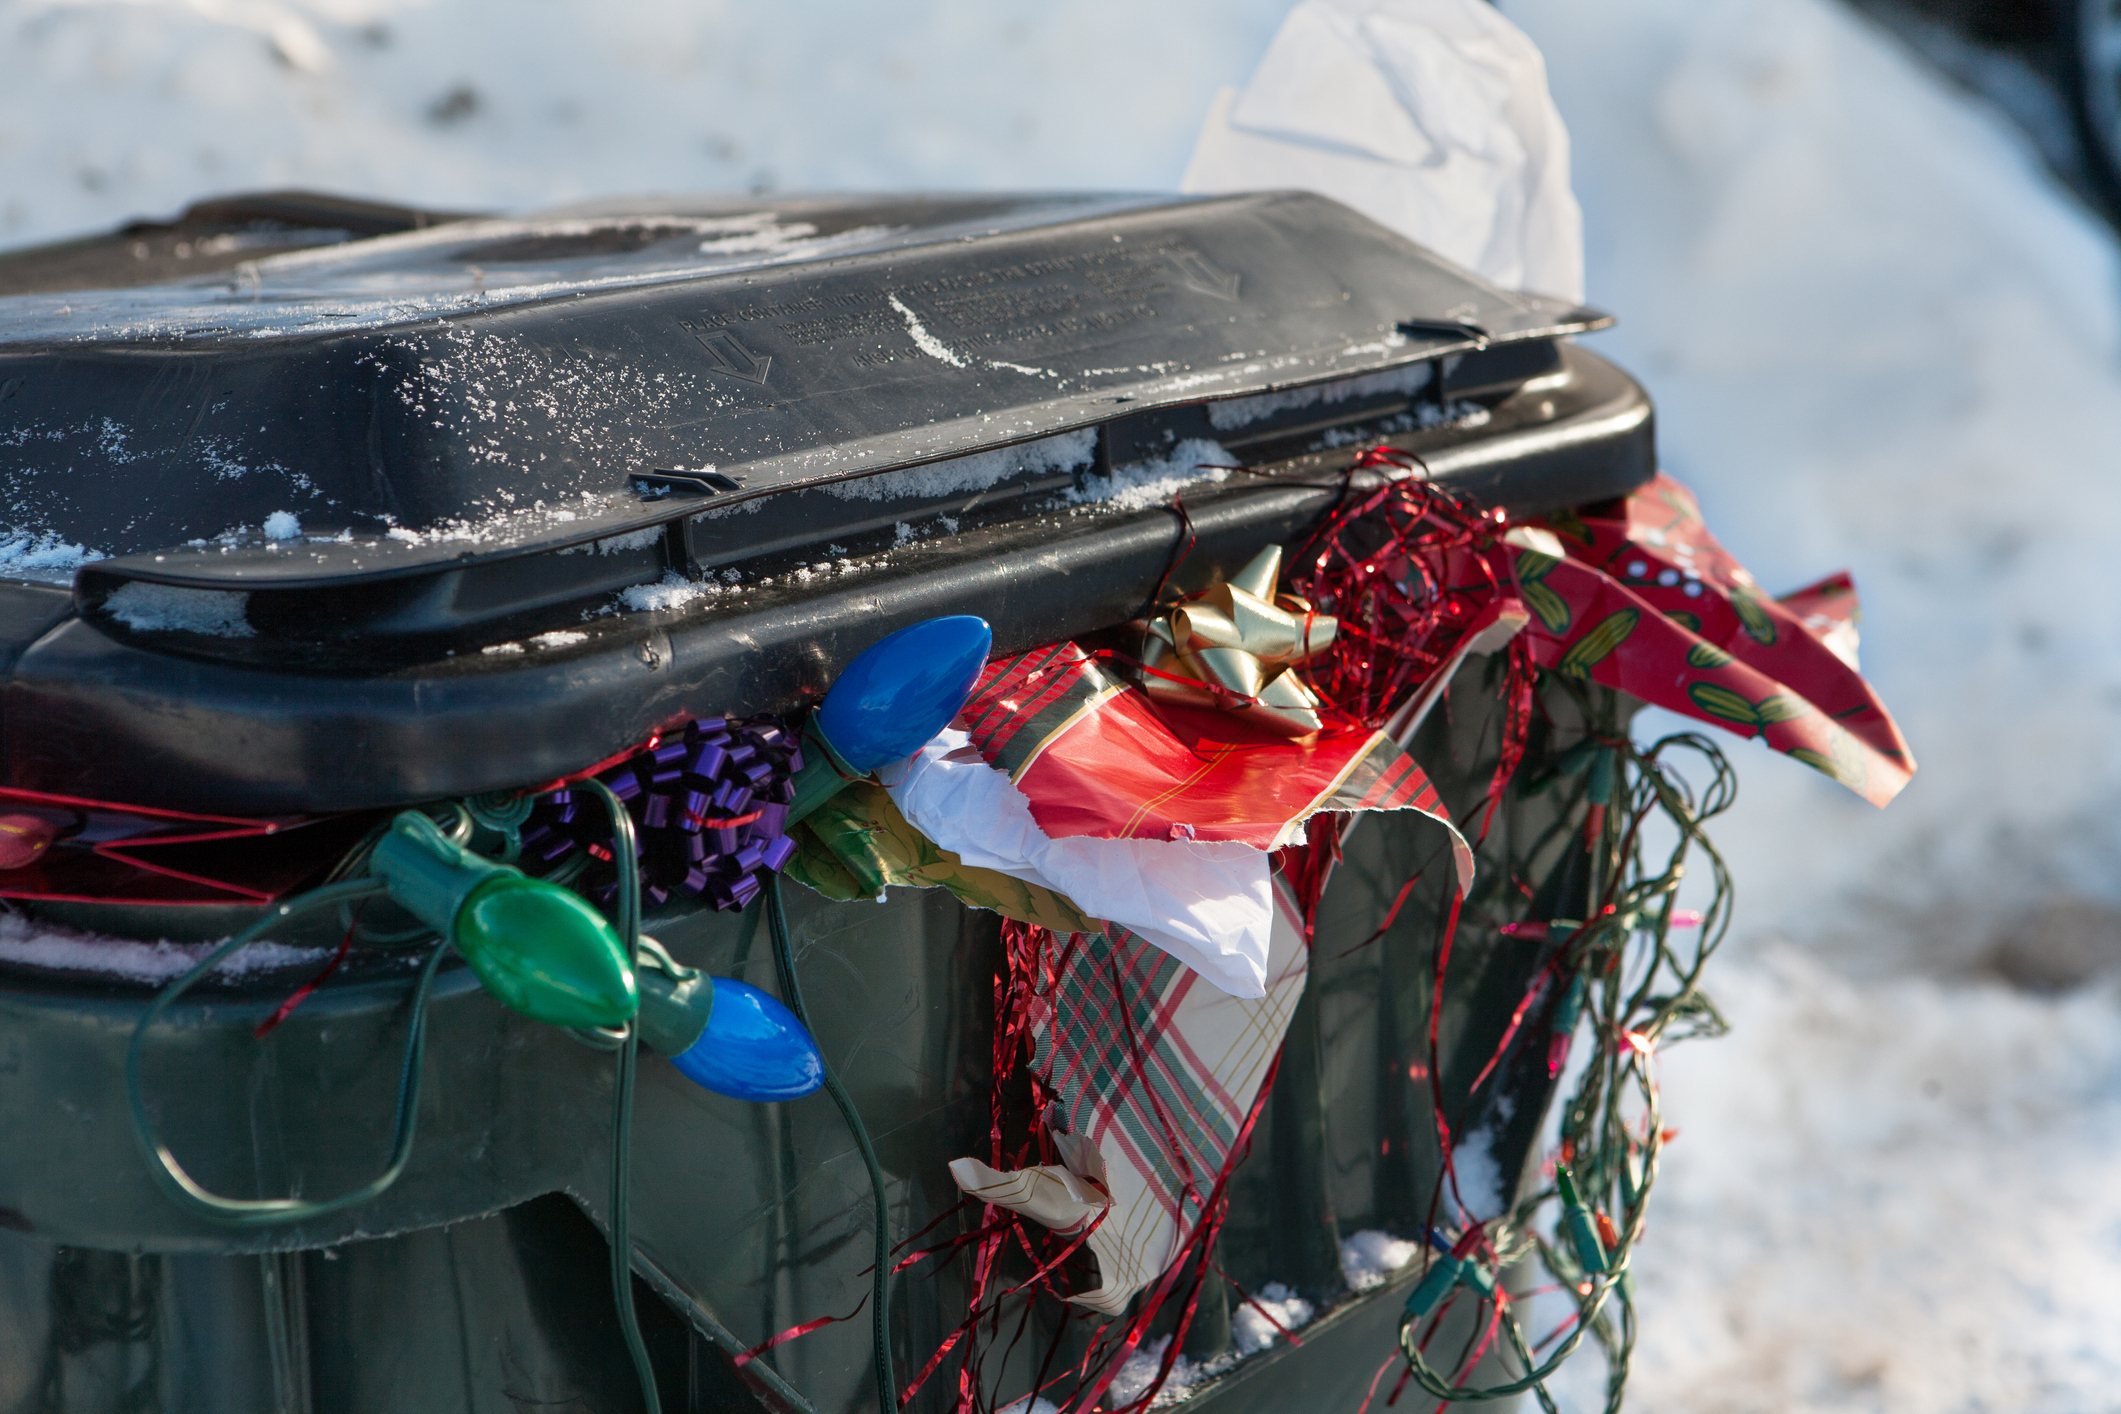 A green trash can overflows with festive holiday garbage.